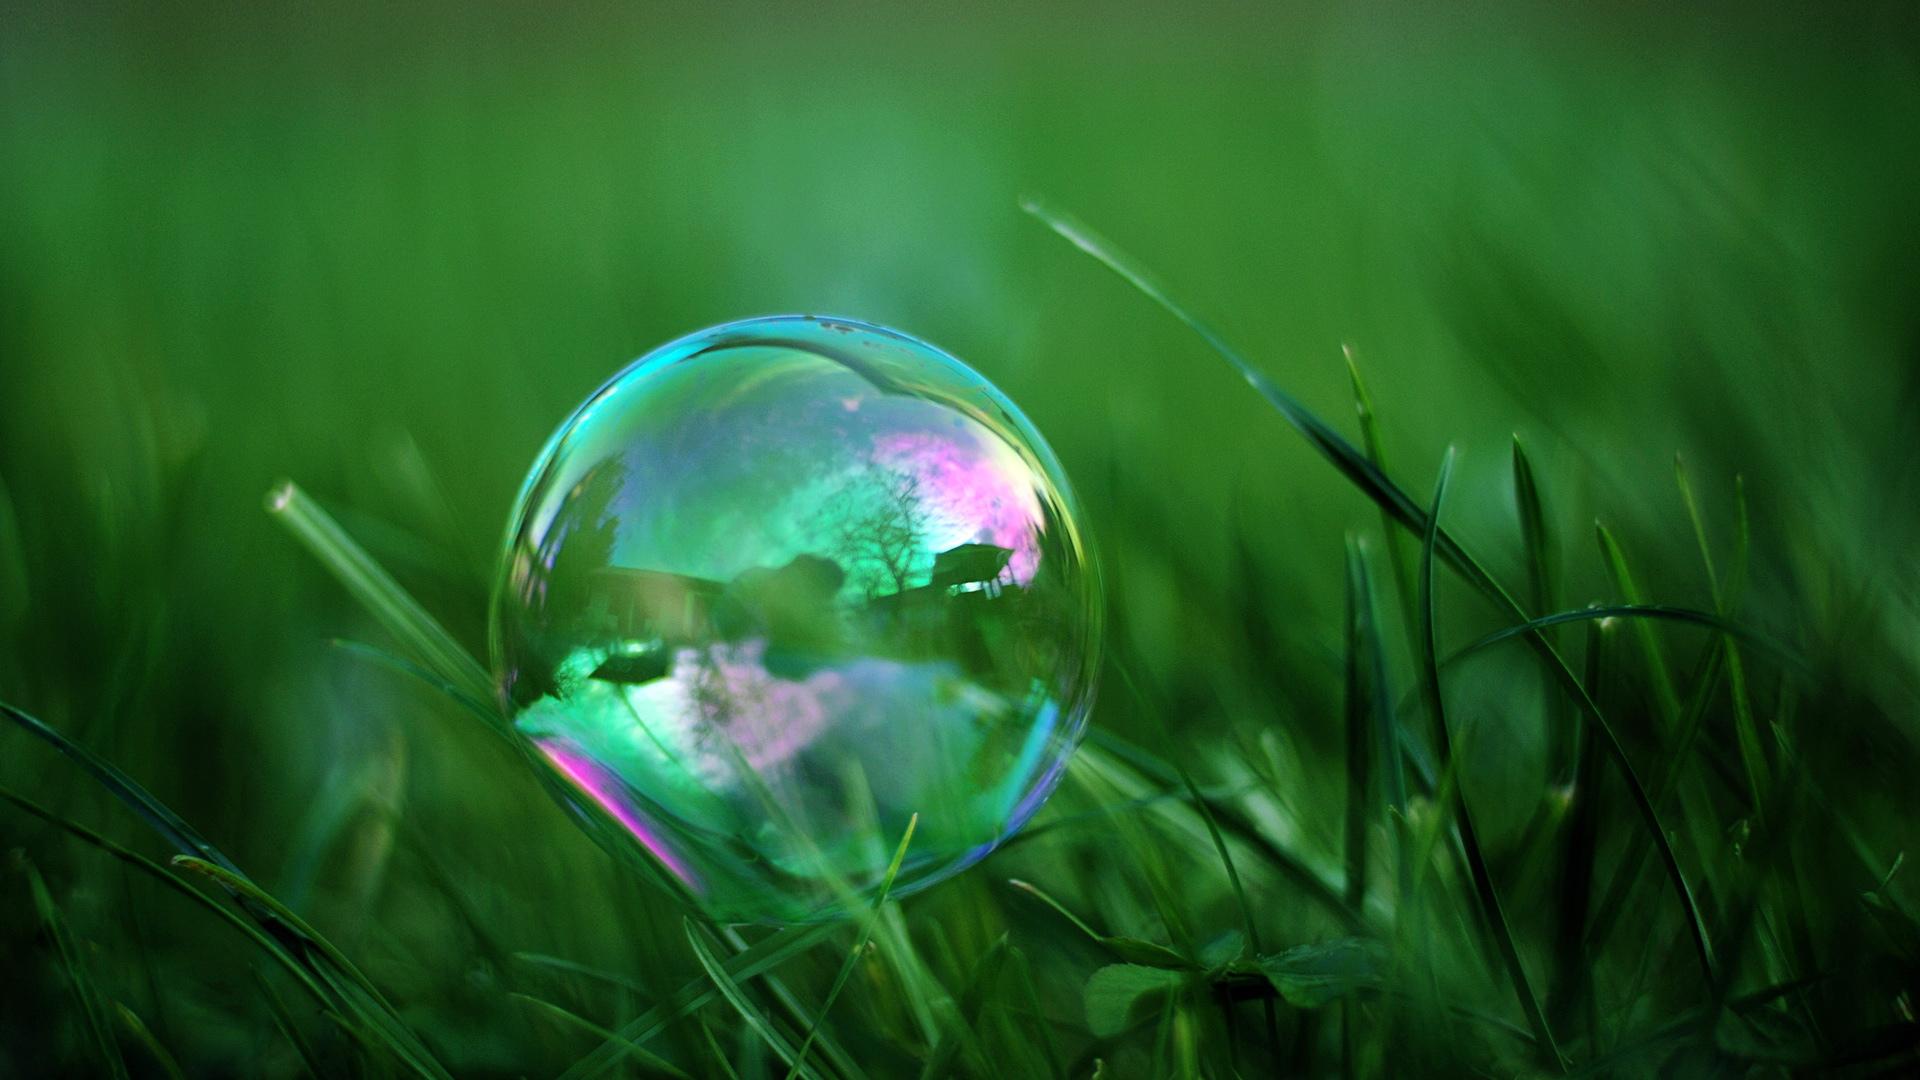 Bubble Wallpaper For Pc - Crown Tv 22 Inch Price , HD Wallpaper & Backgrounds